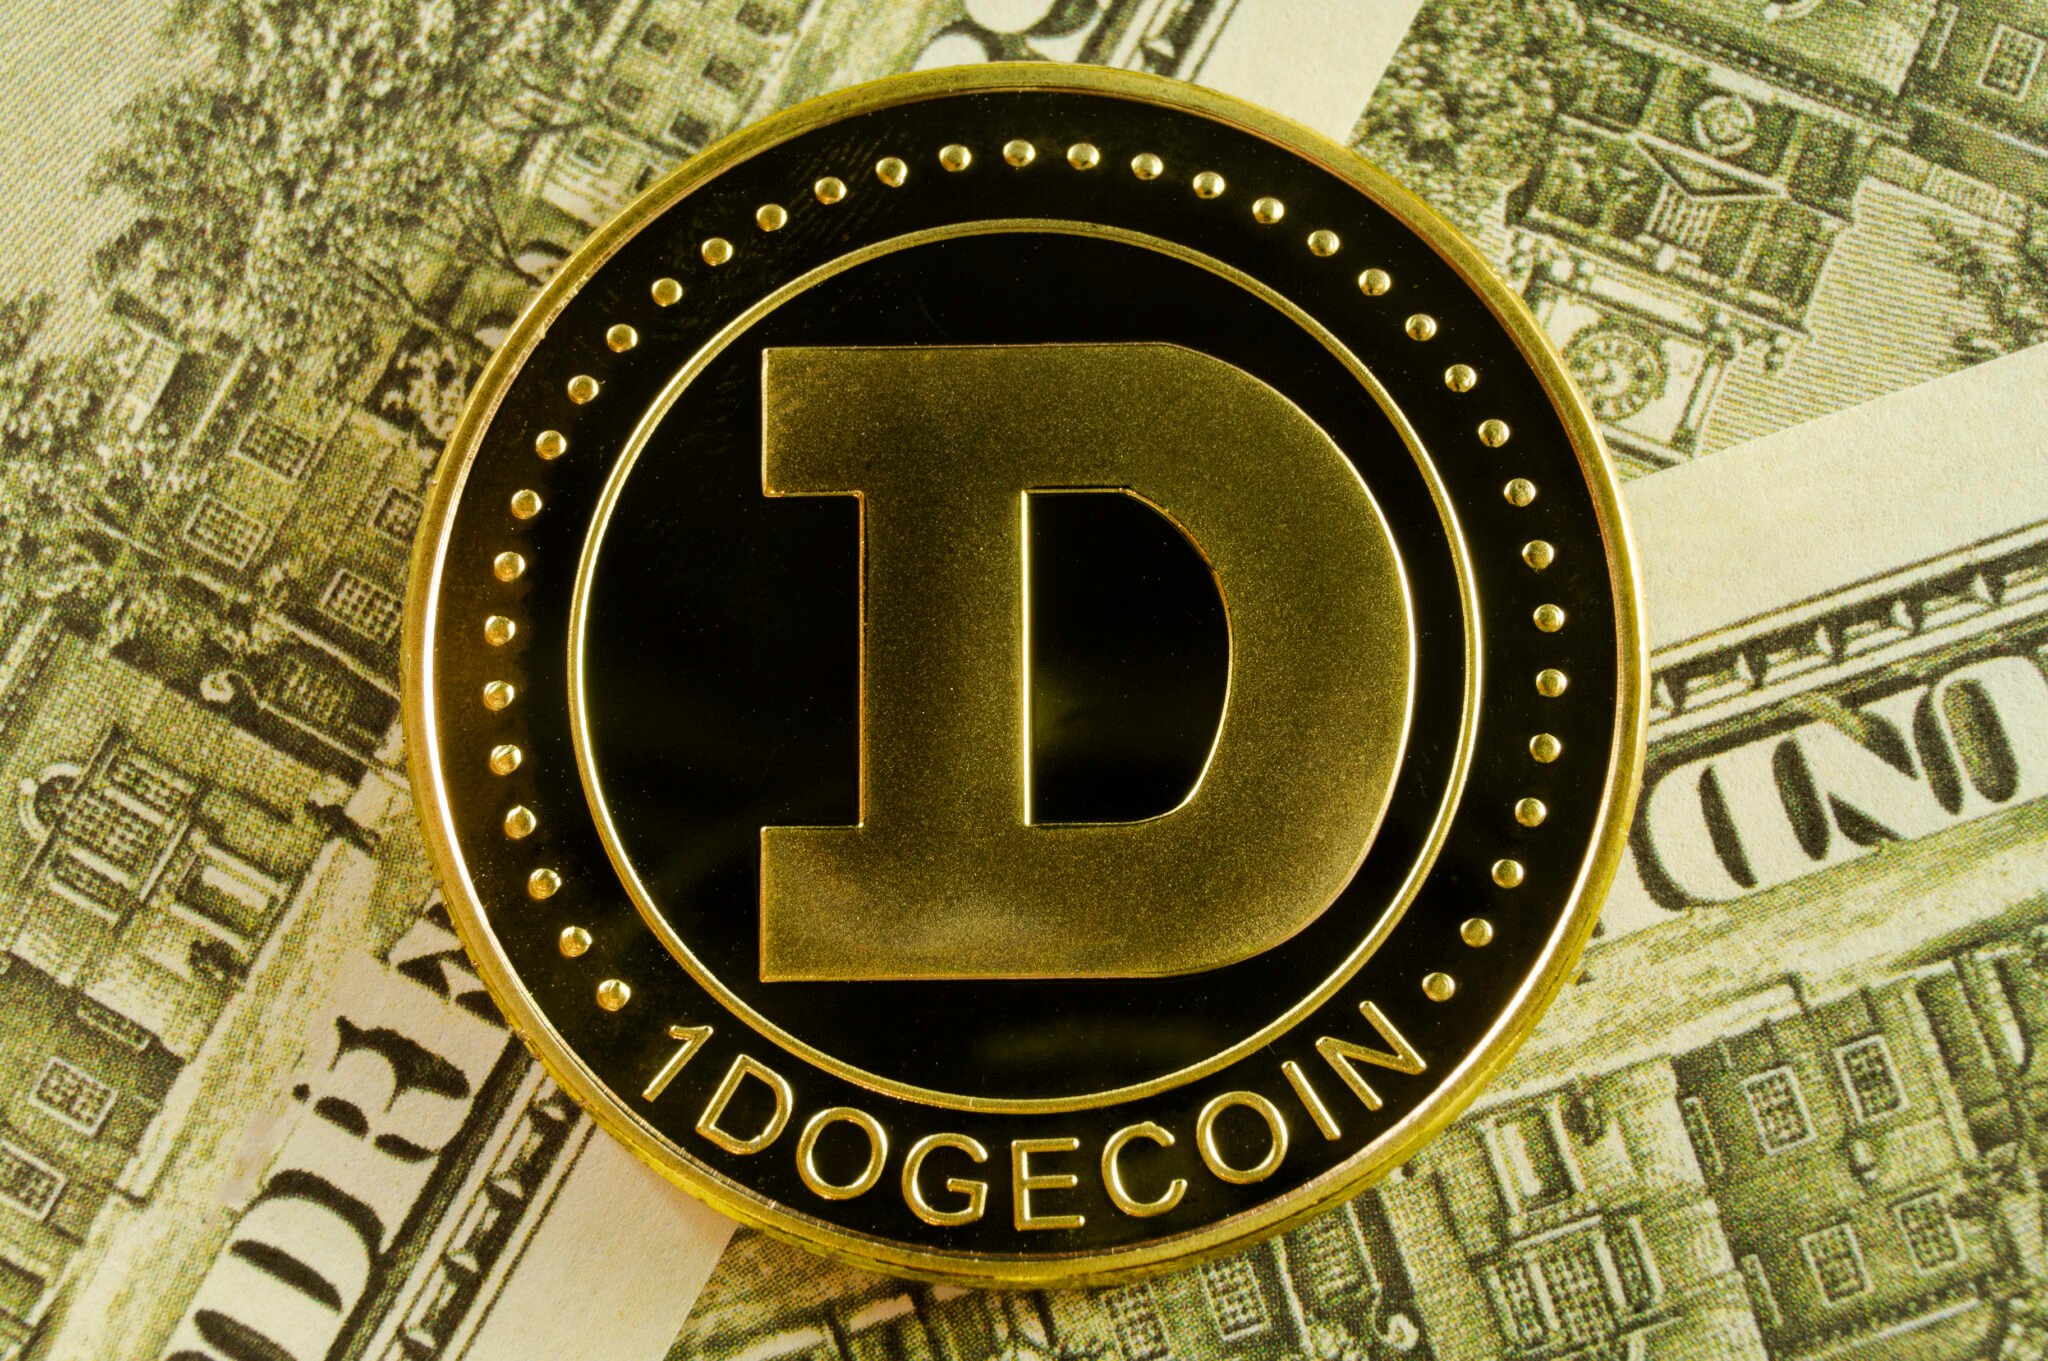 Following the “confrontation” between Elon Musk and Changpeng Zhao, Dogecoin loses its value